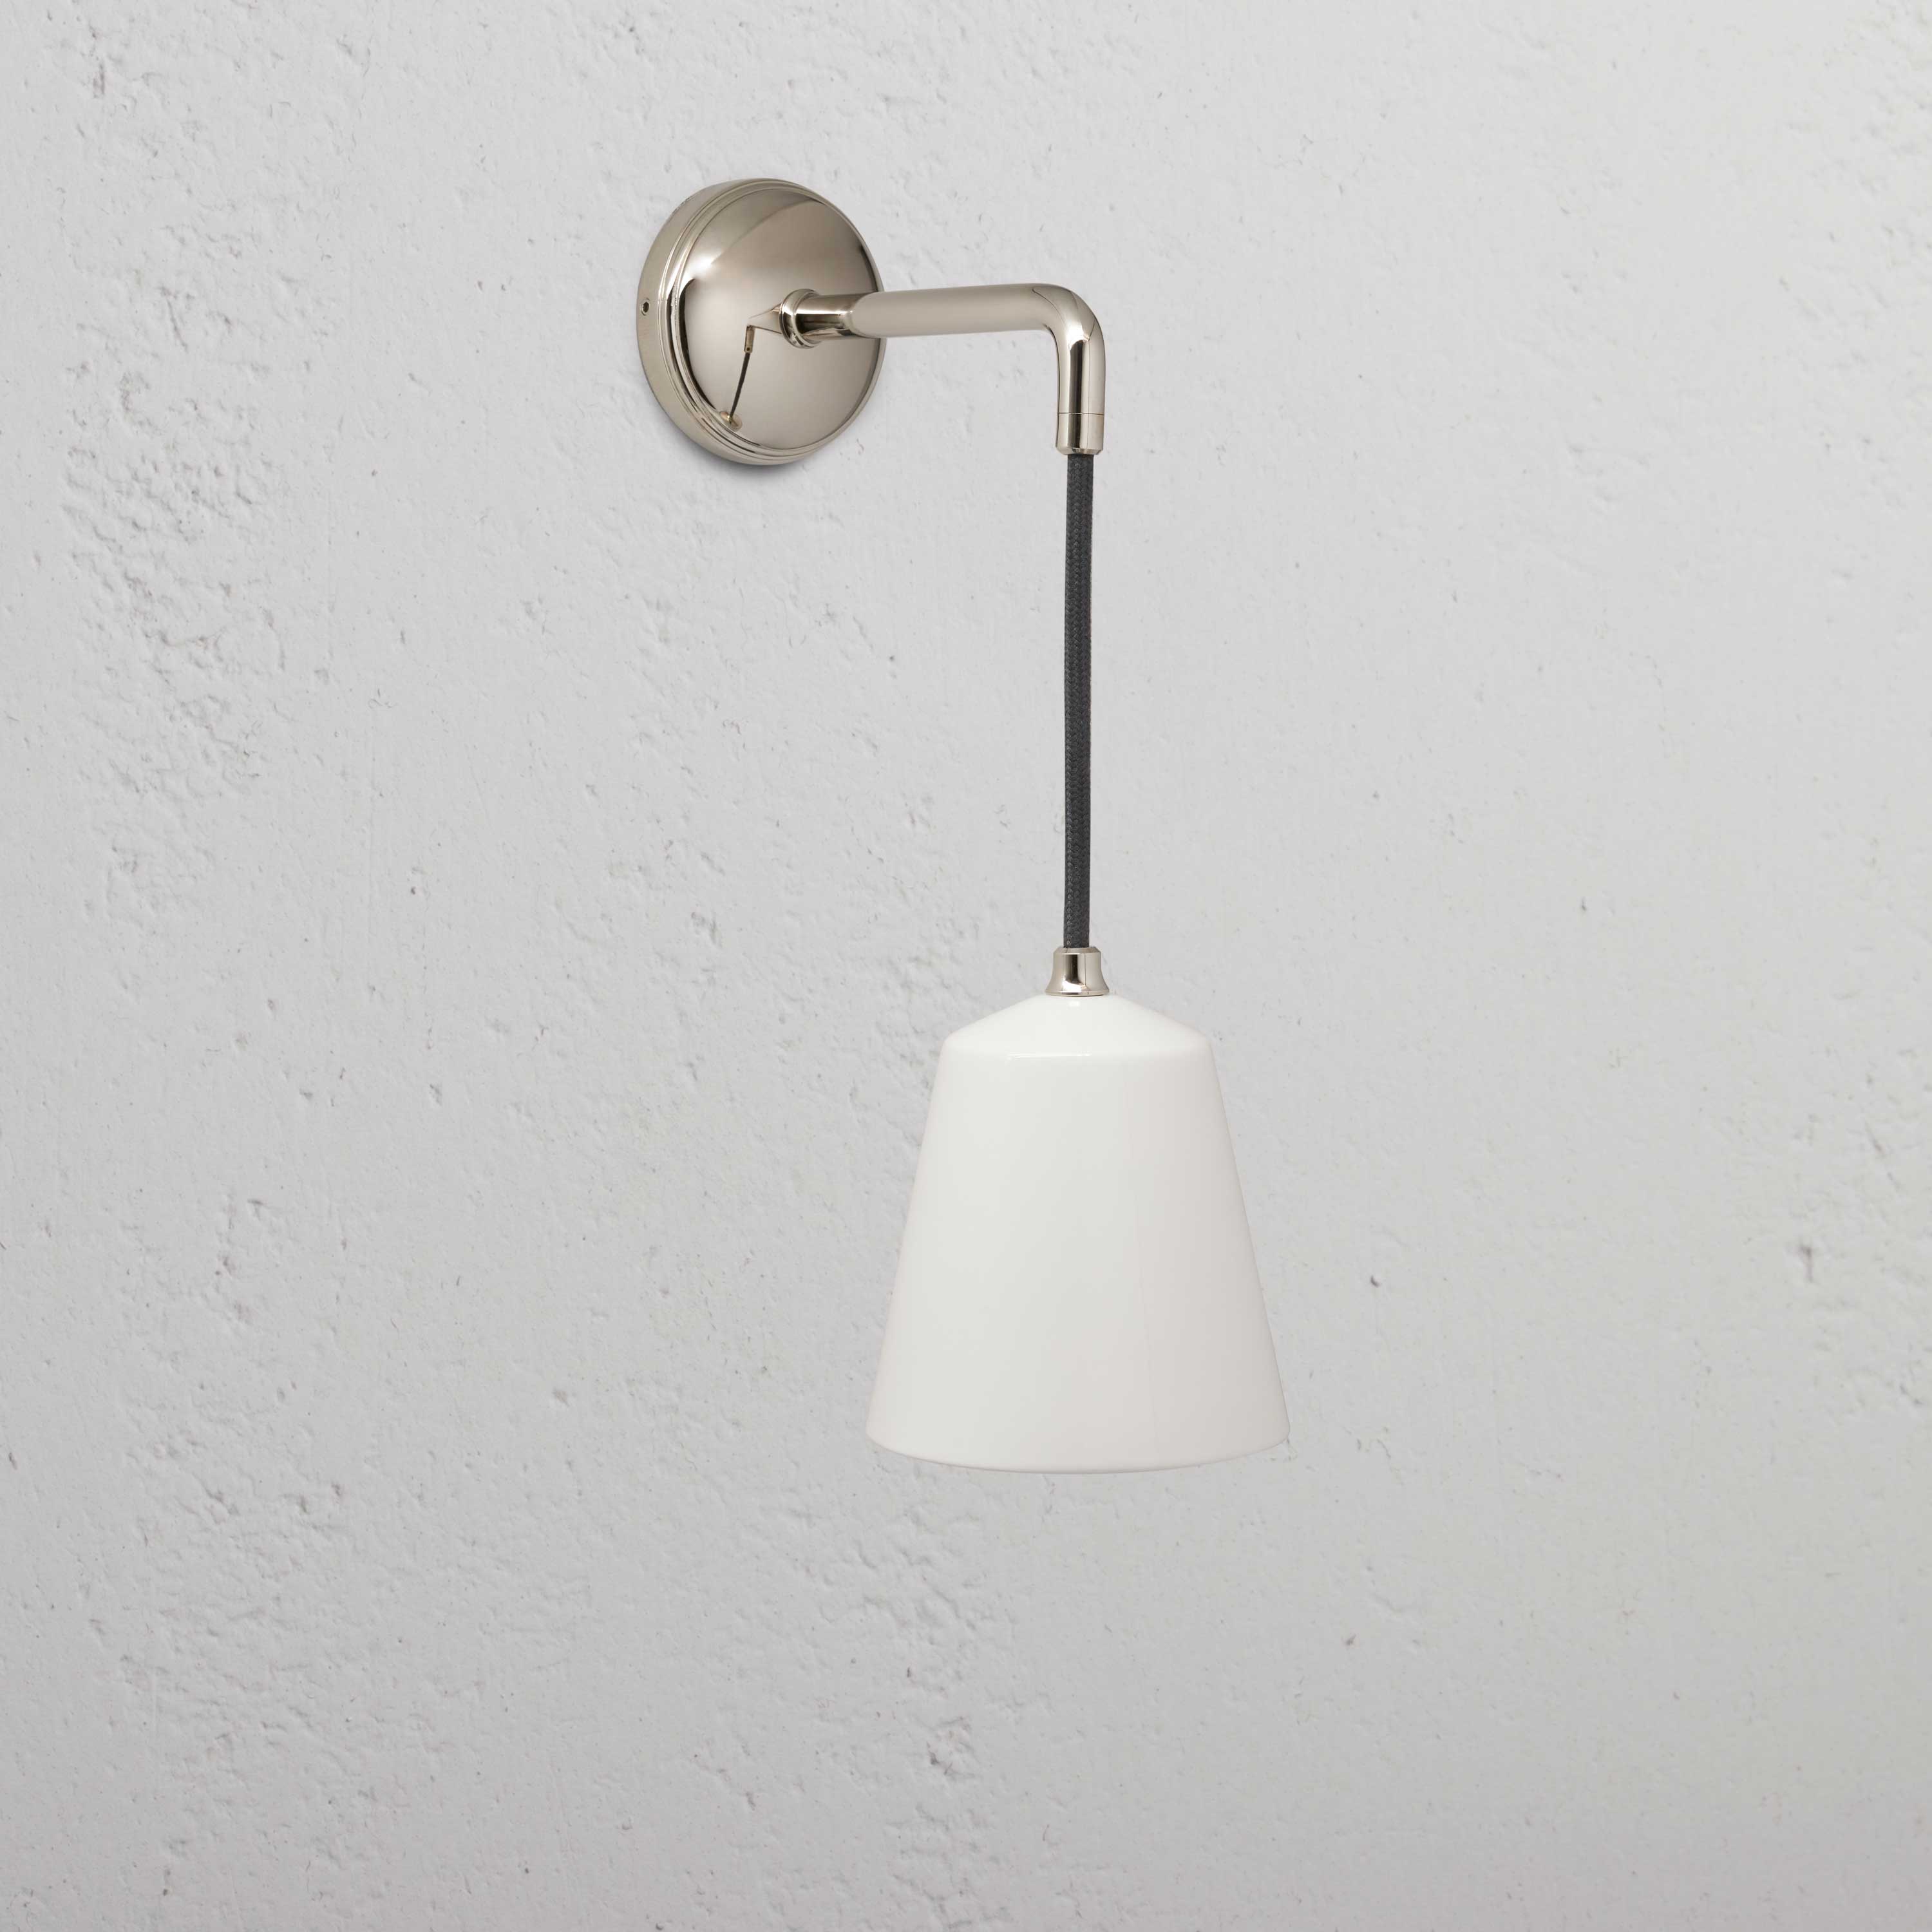 Luxury Polished Nickel Hanging Wall Light on Textured Wall Paired with a Fine Porcelain Shade